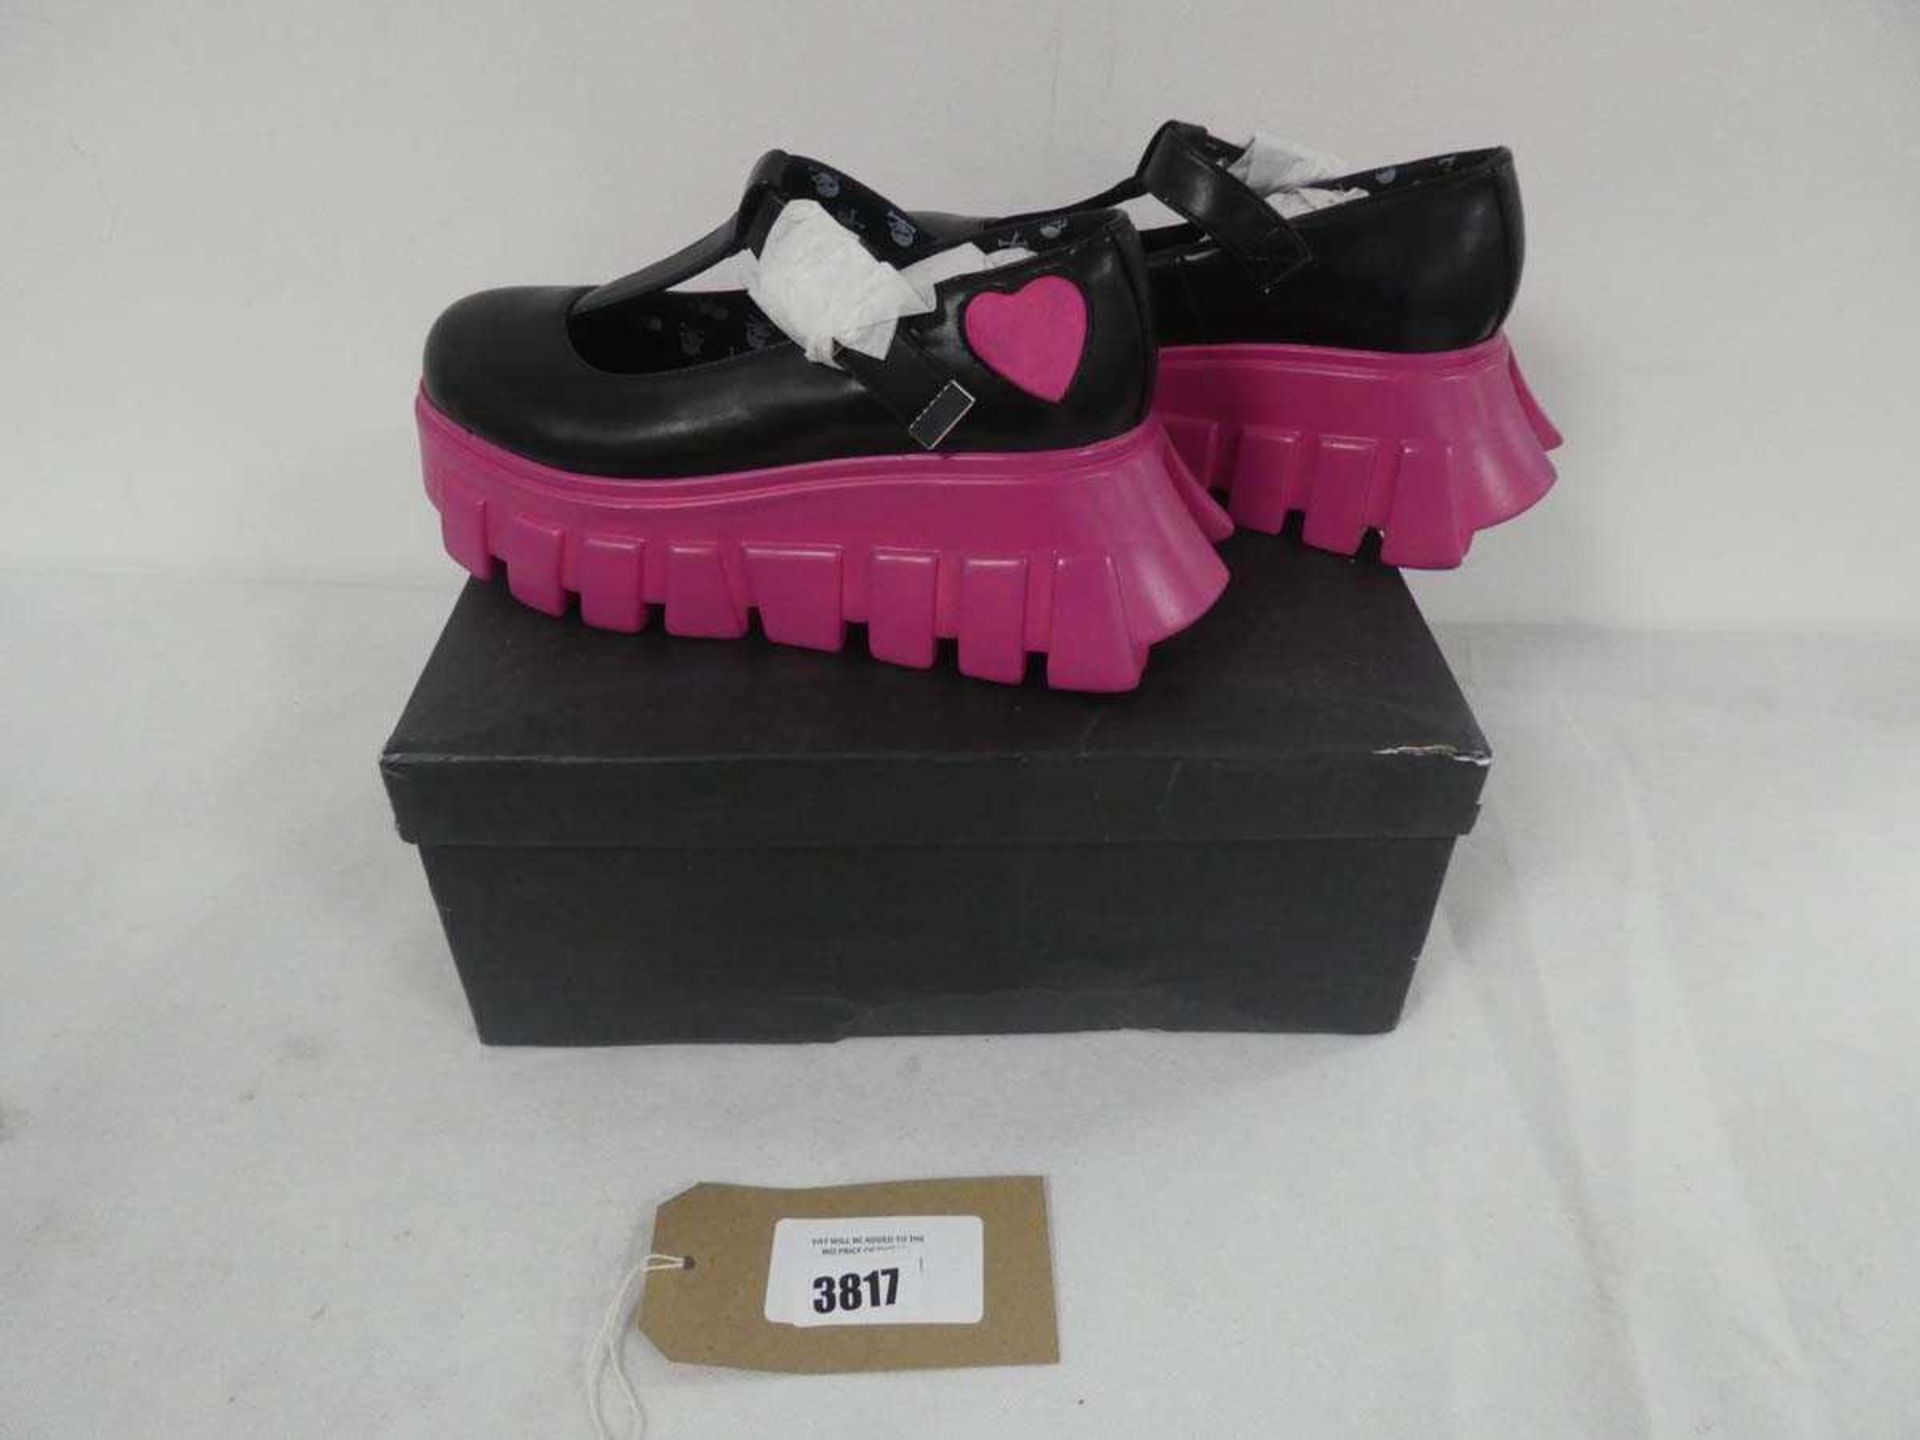 +VAT Pair of size 5 La Moda radioactive platform Mary Janes in black and pink with heart motif (